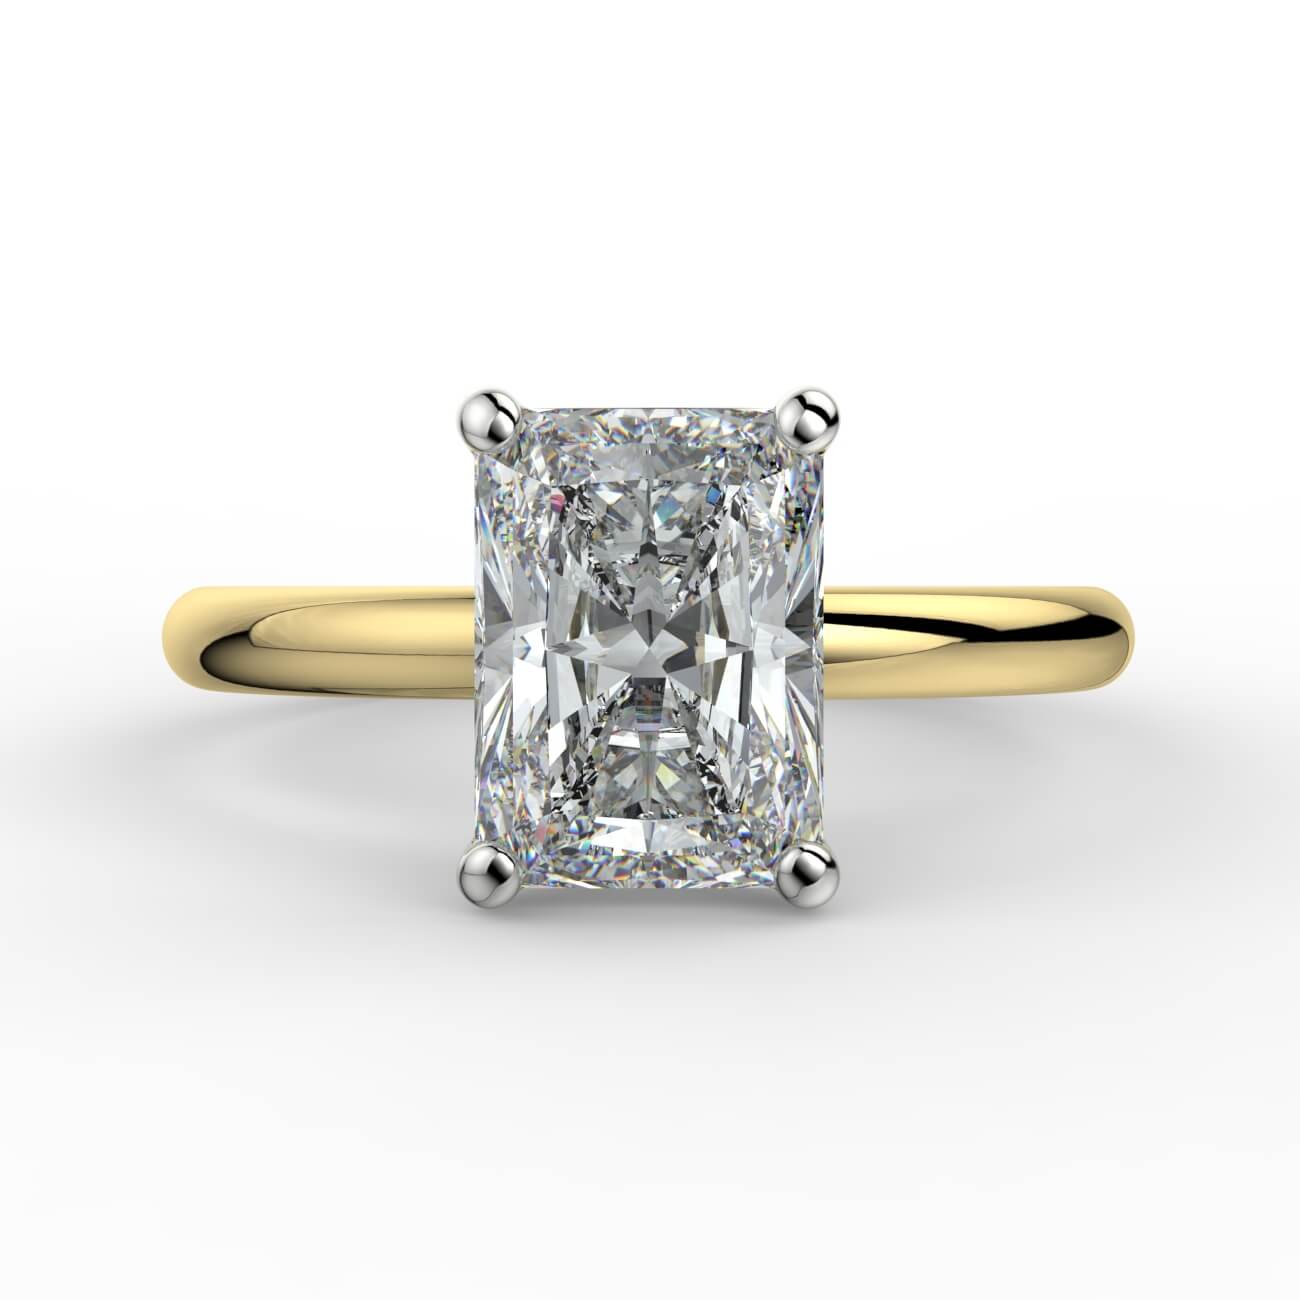 Solitaire radiant cut diamond engagement ring in white and yellow gold – Australian Diamond Network